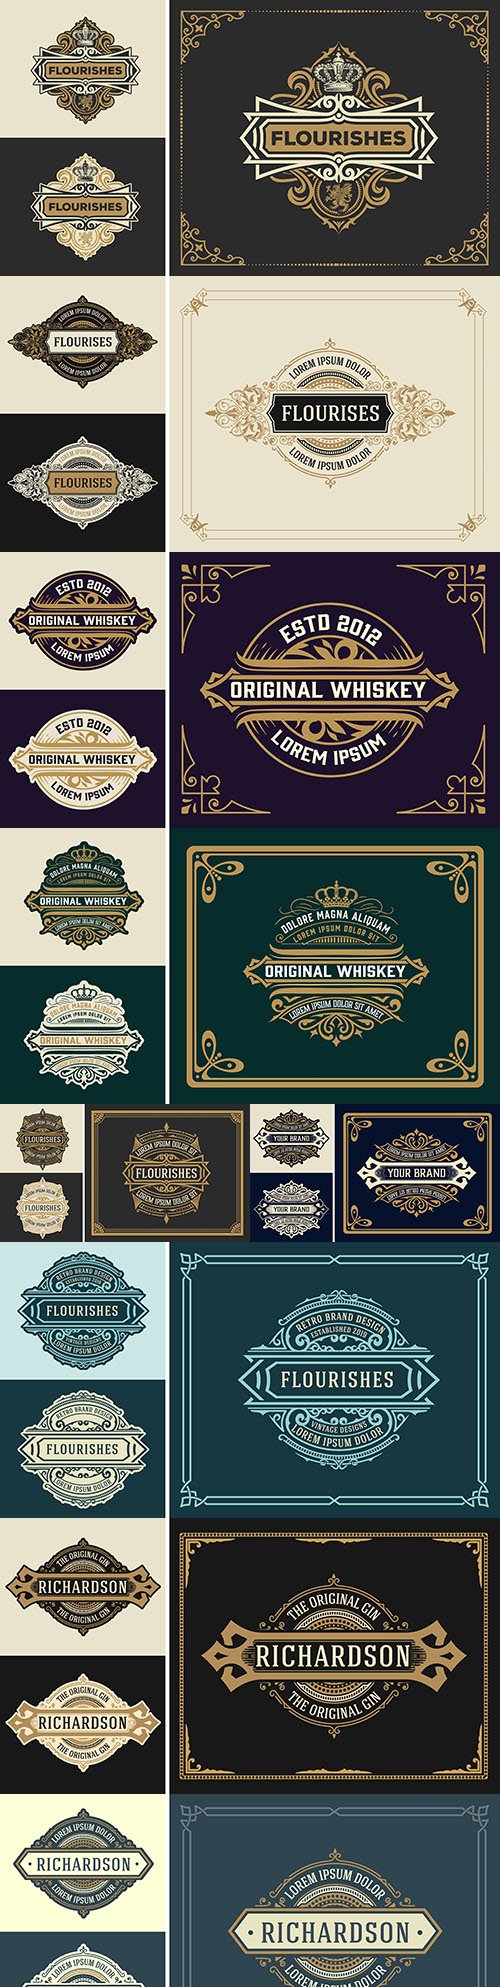 Vintage luxury logo template with detailed design - Vectors - Free PSD ...